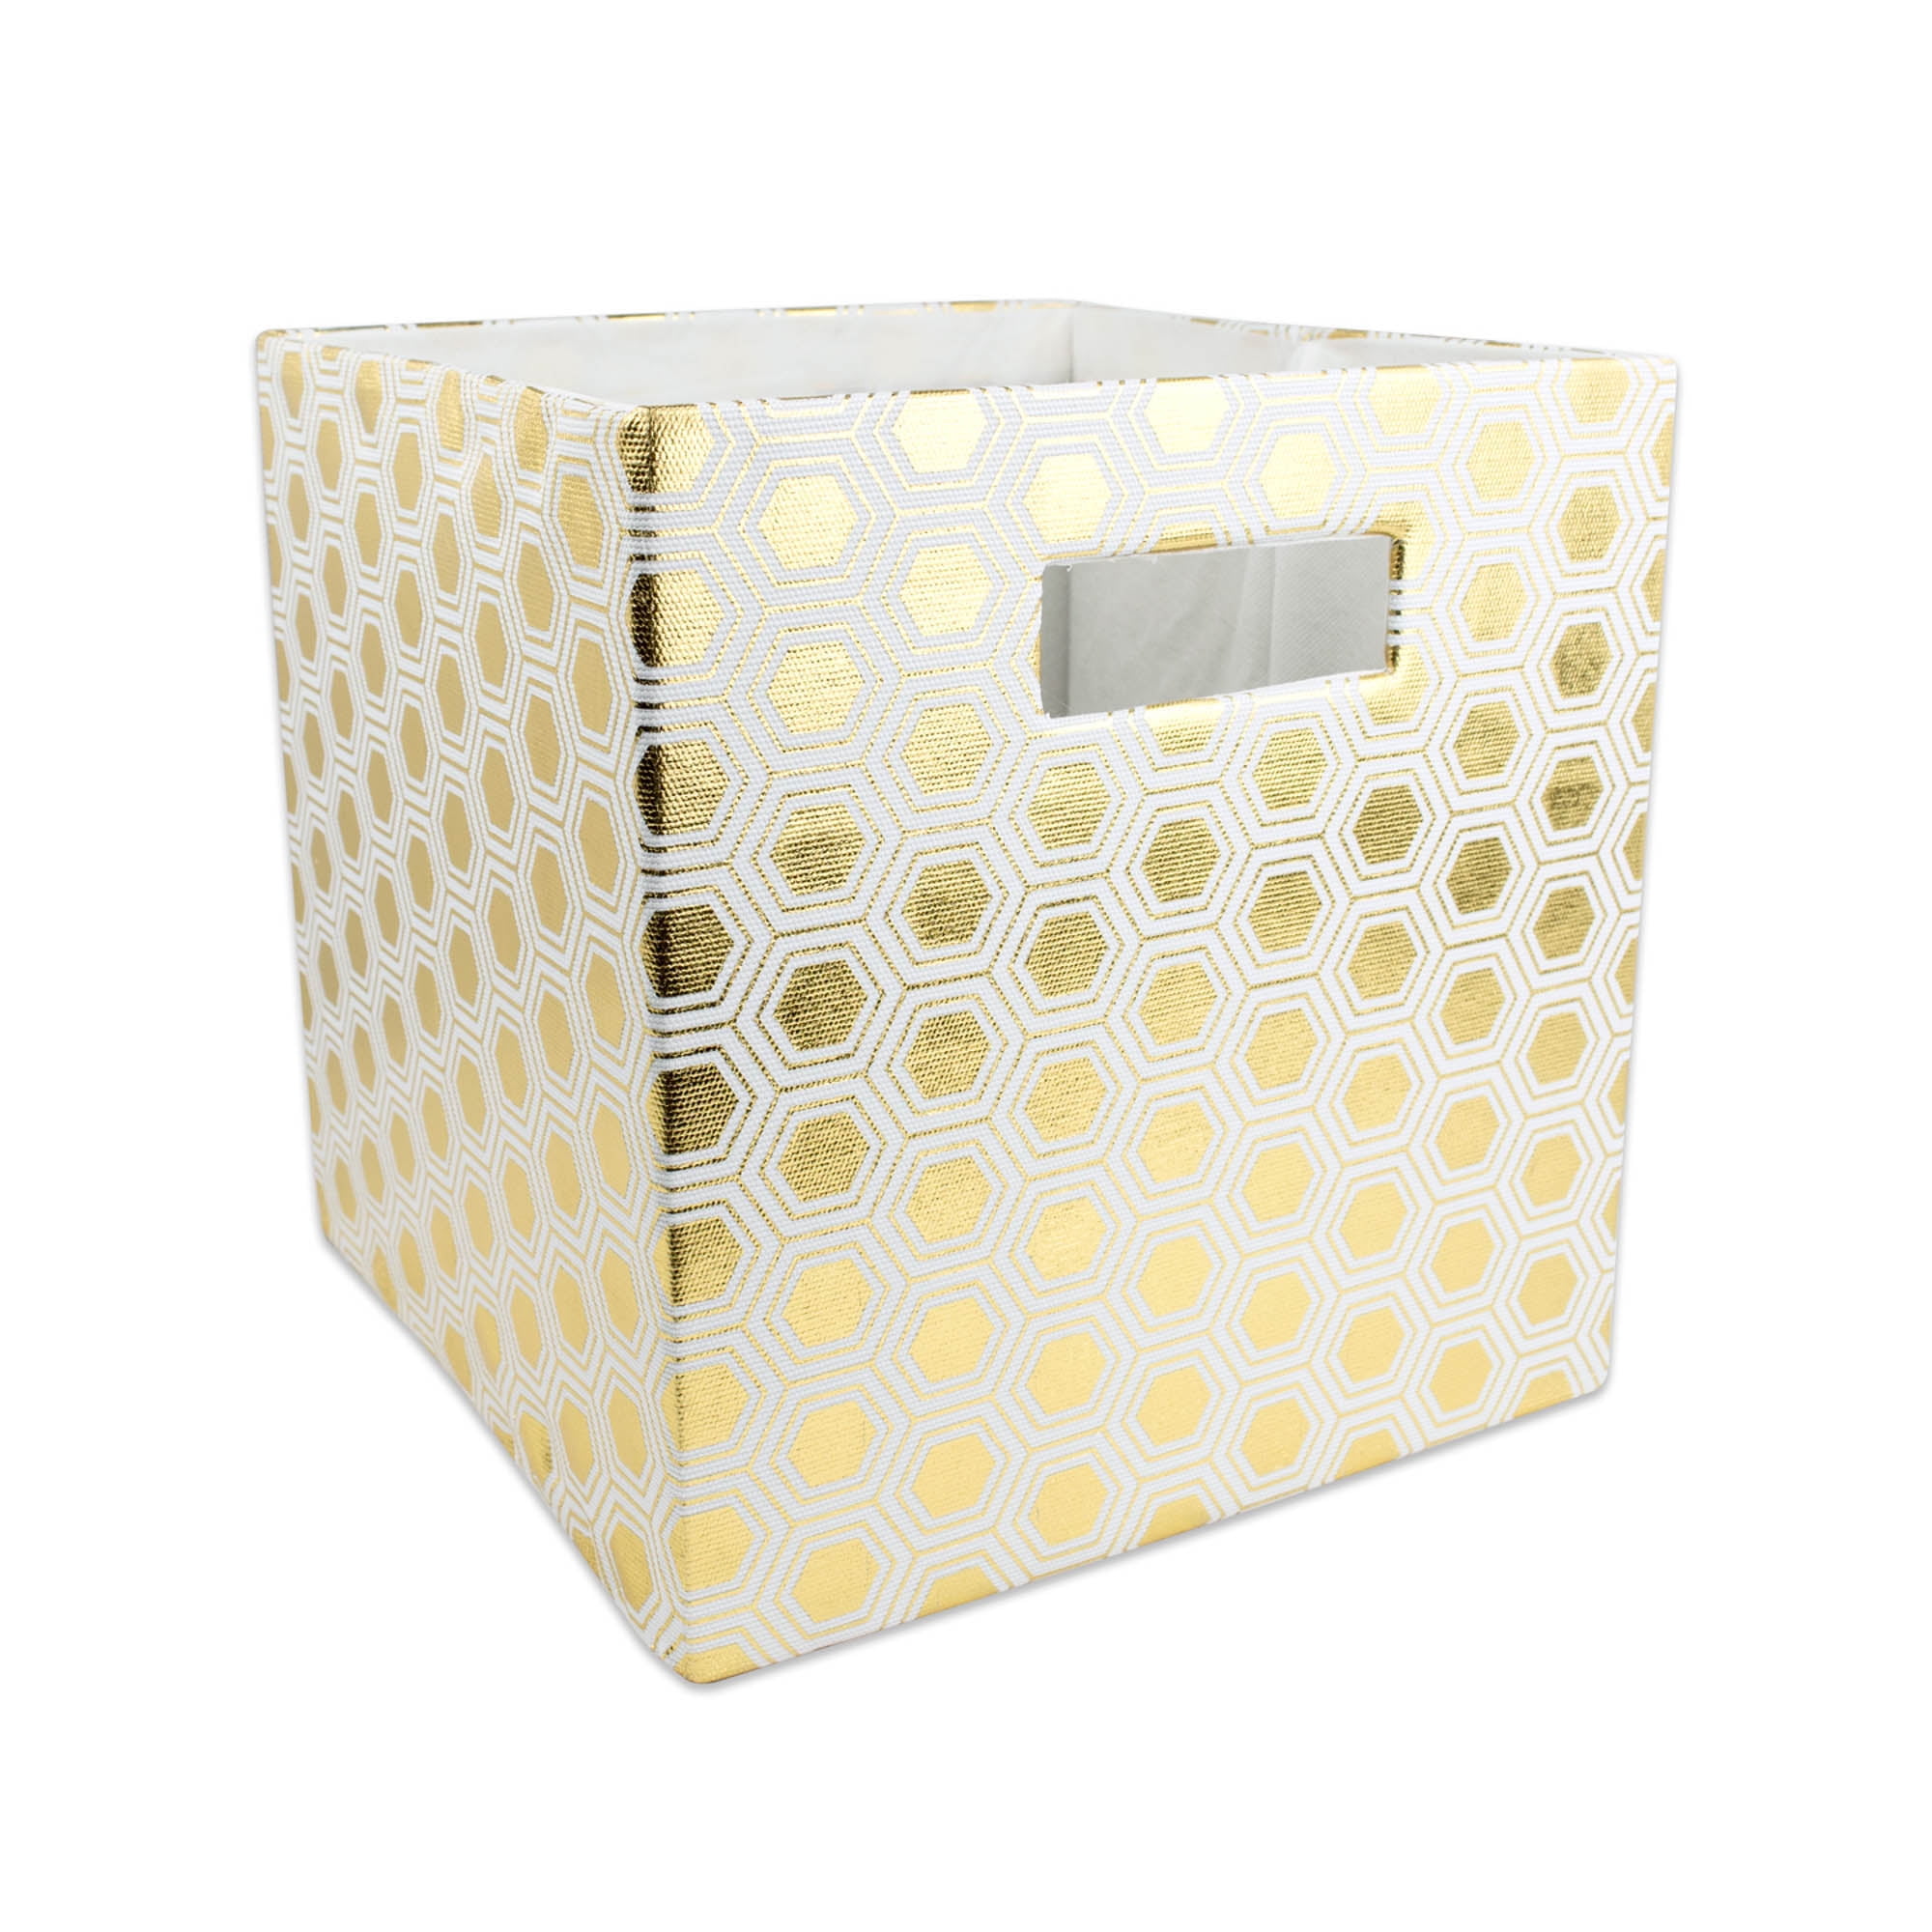 Design Imports Camz36647 11 X 11 X 11 In. Honeycomb Square Polyester Storage Cube, Gold